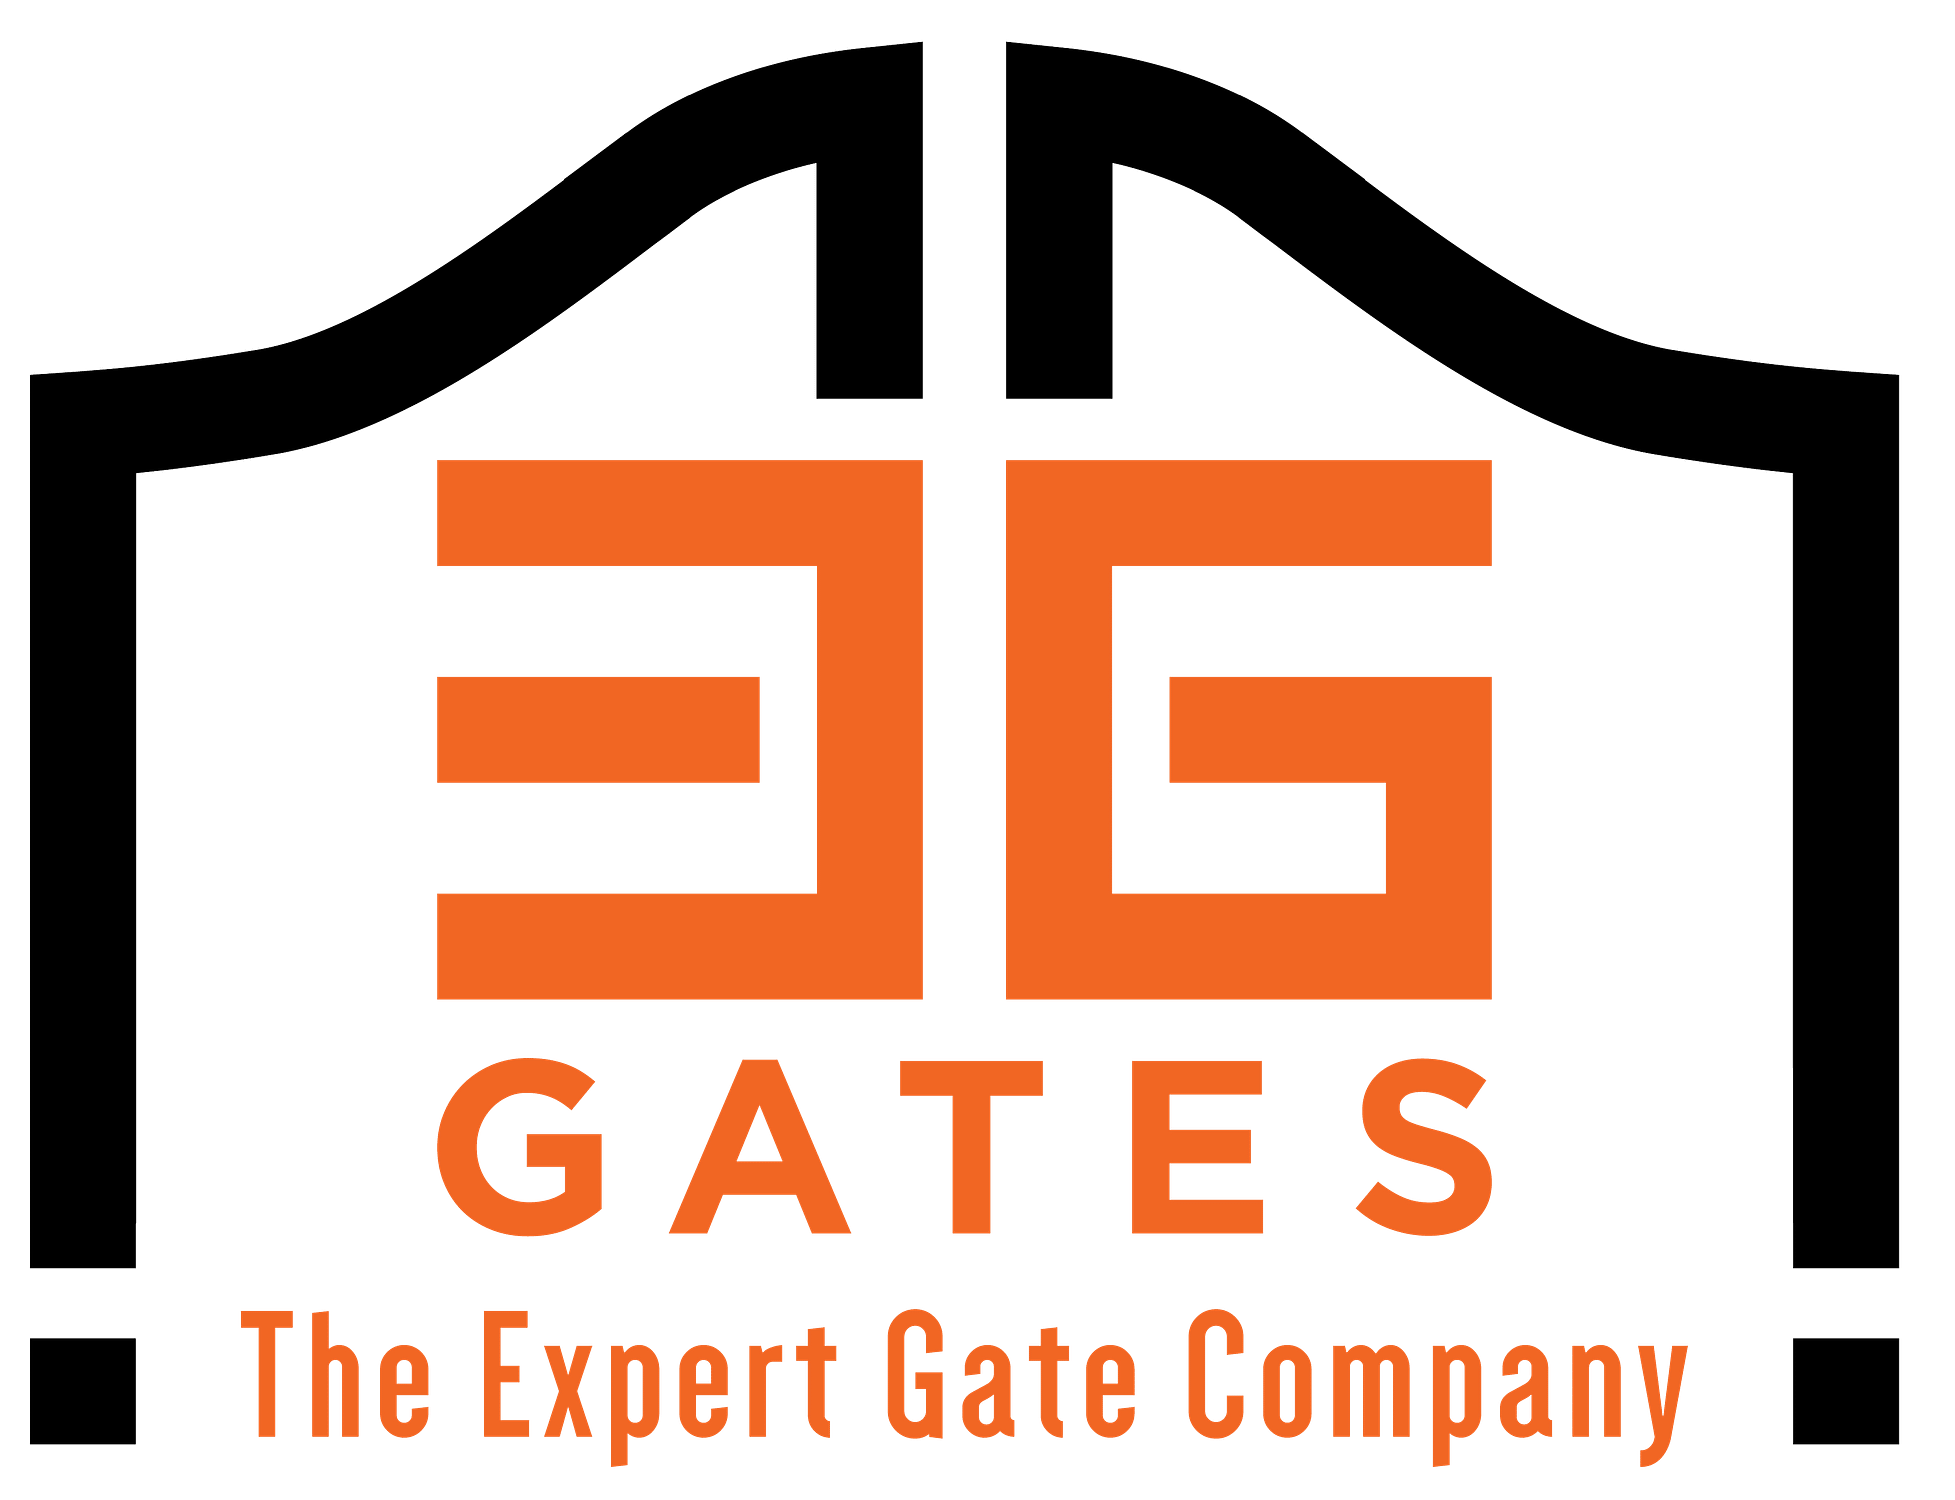 THE EXPERT GATE COMPANY